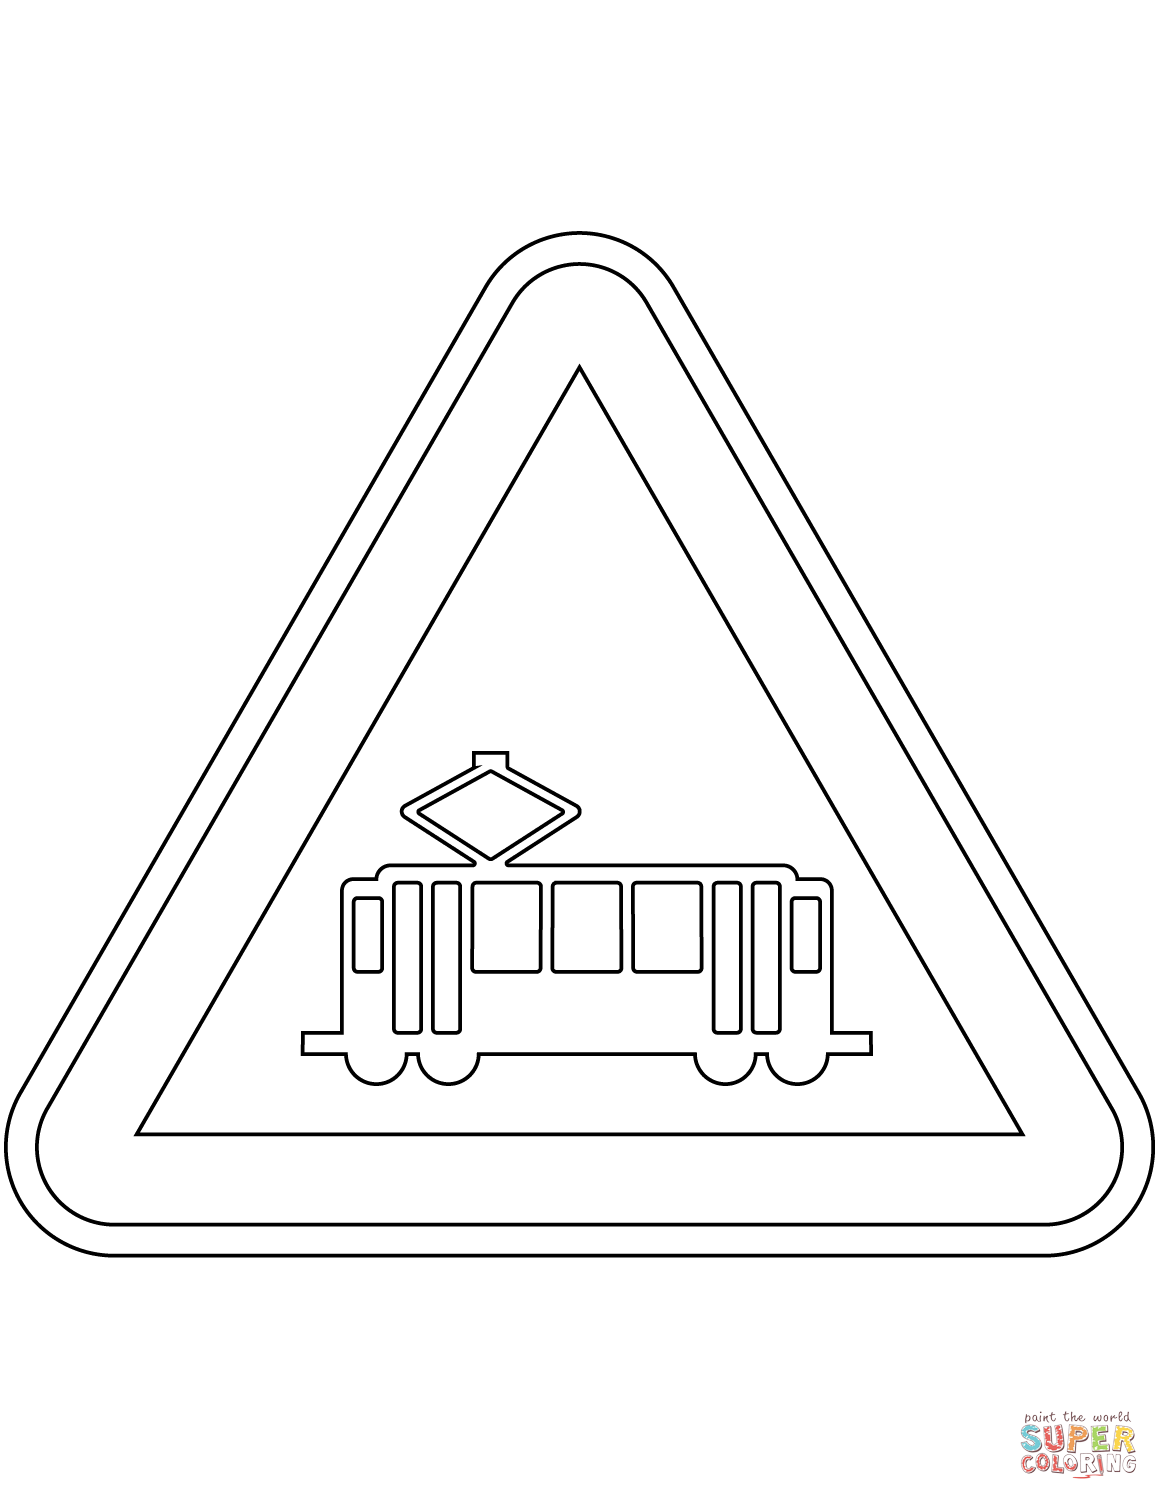 Tram crossing sign in portugal coloring page free printable coloring pages